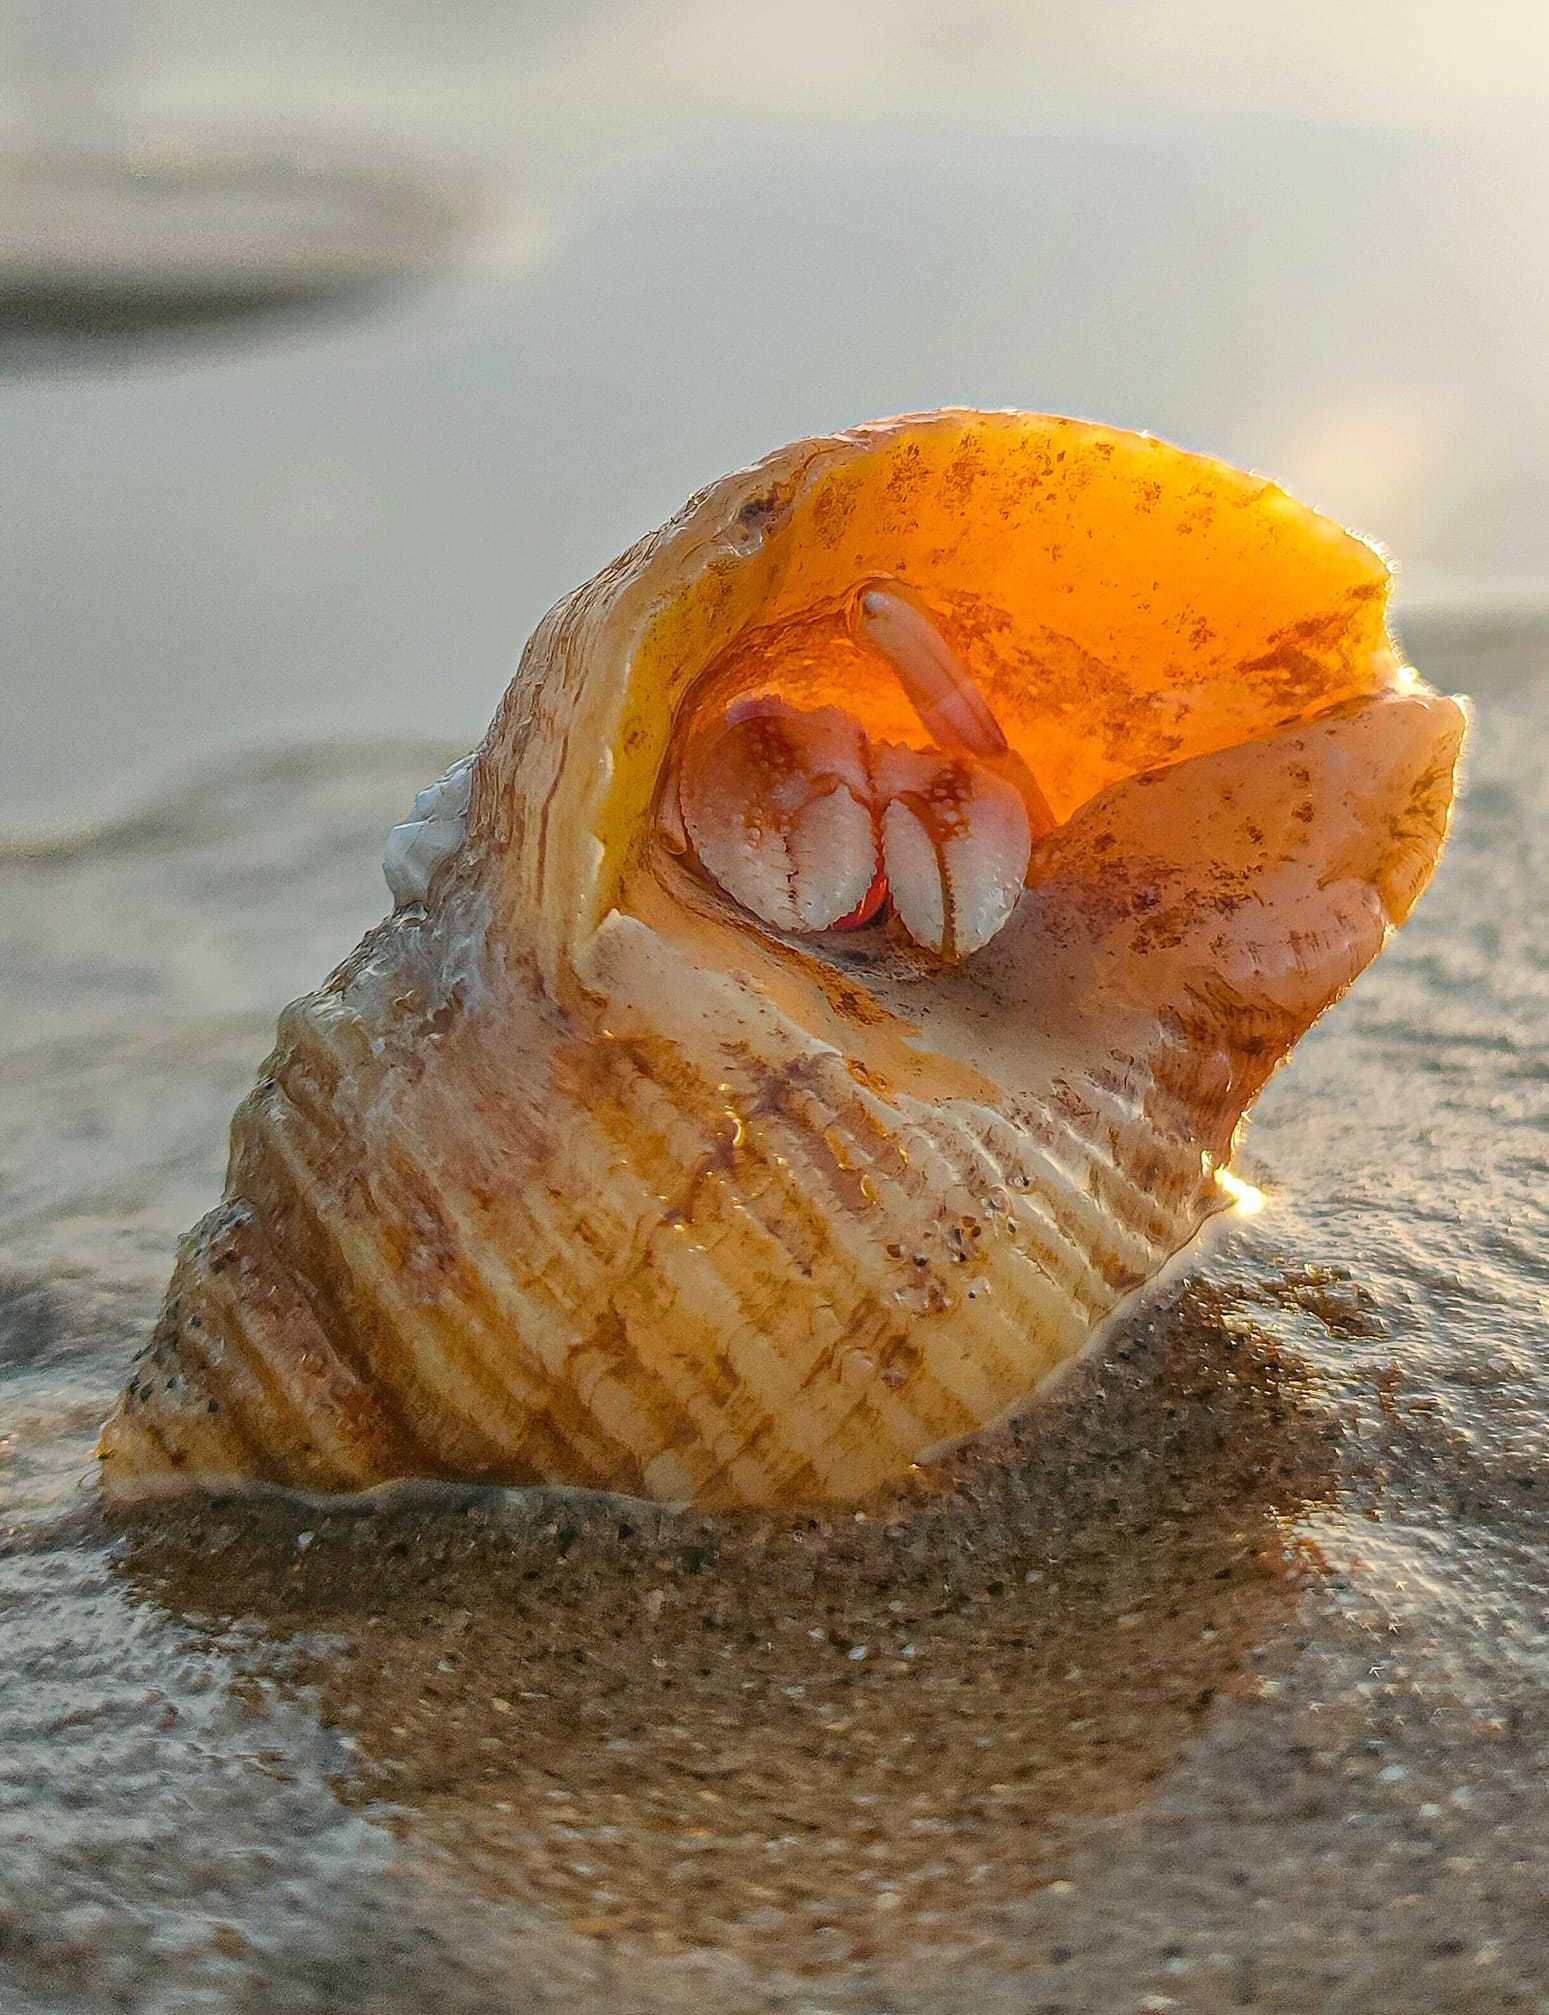 A hermit crab inside a whelk shell by Kimberley Phillips